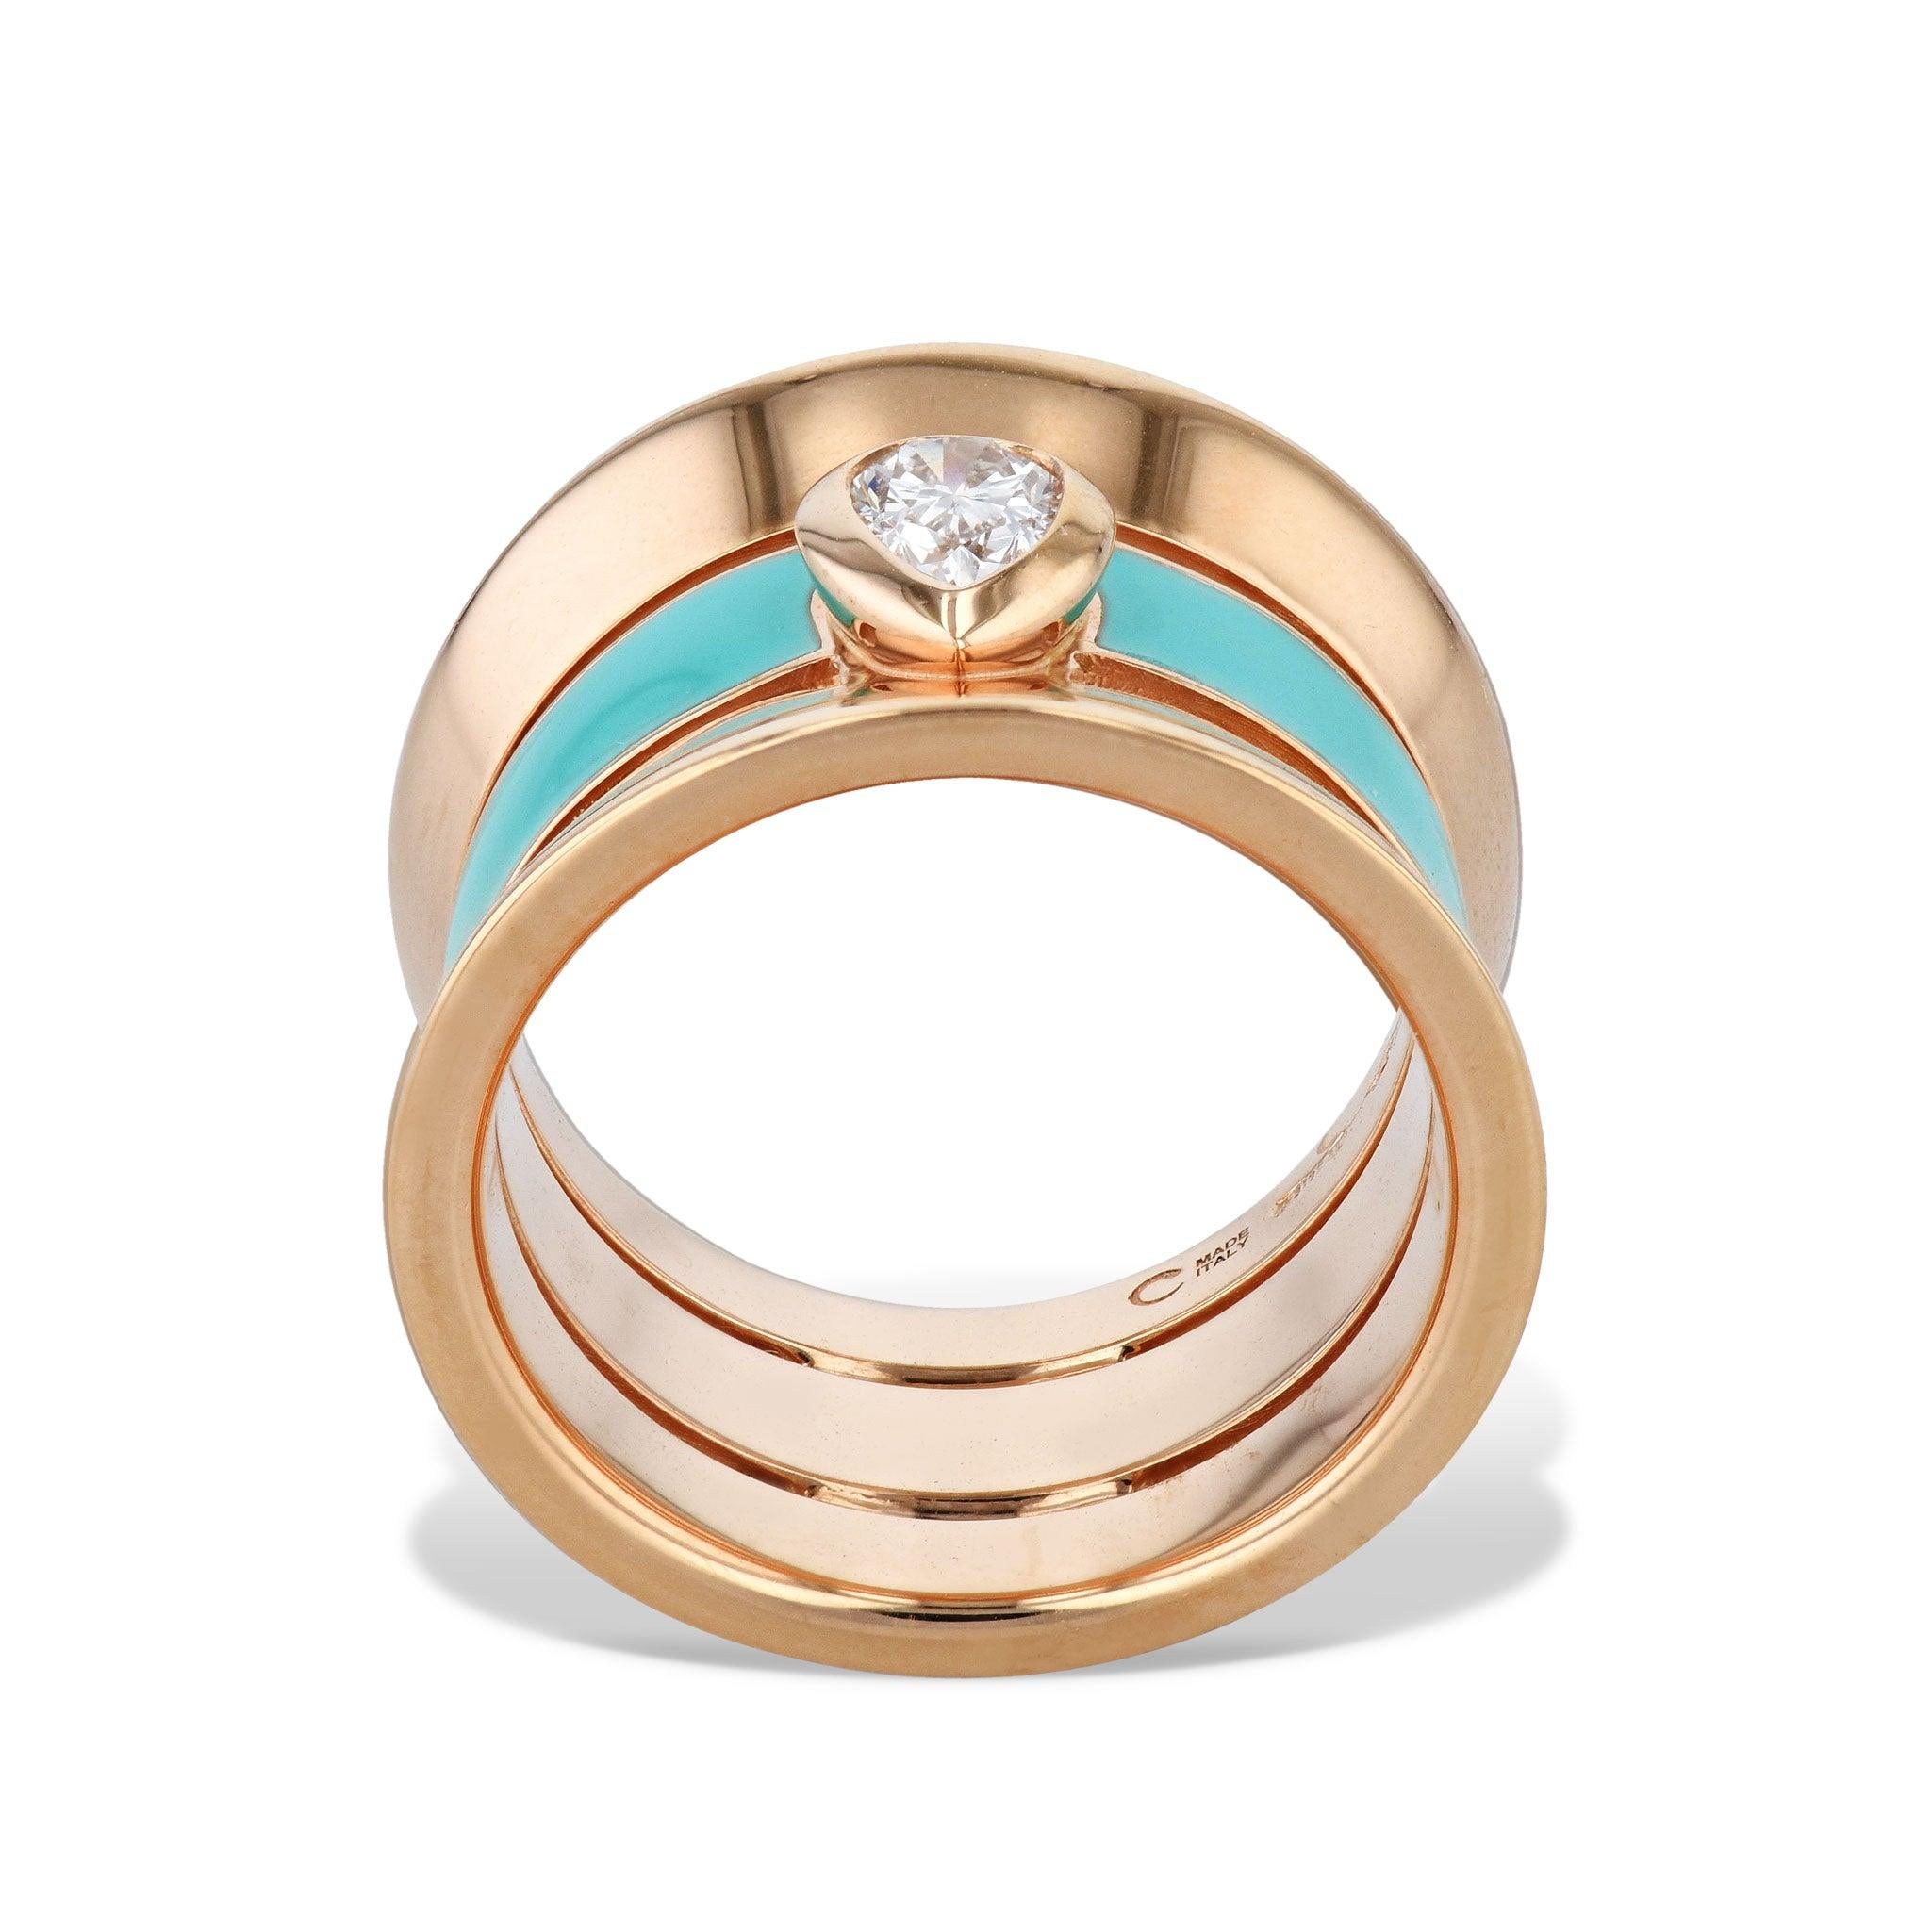 This sophisticated Diamond and Enamel 18K Pink Gold 3-Band Ring exudes elegance with a Pear Shaped Diamond, 3-band design featuring an air line center band in green enamel, and crafted from 18 karat Rose Gold.
Diamond and Enamel 18K Pink Gold 3-Band